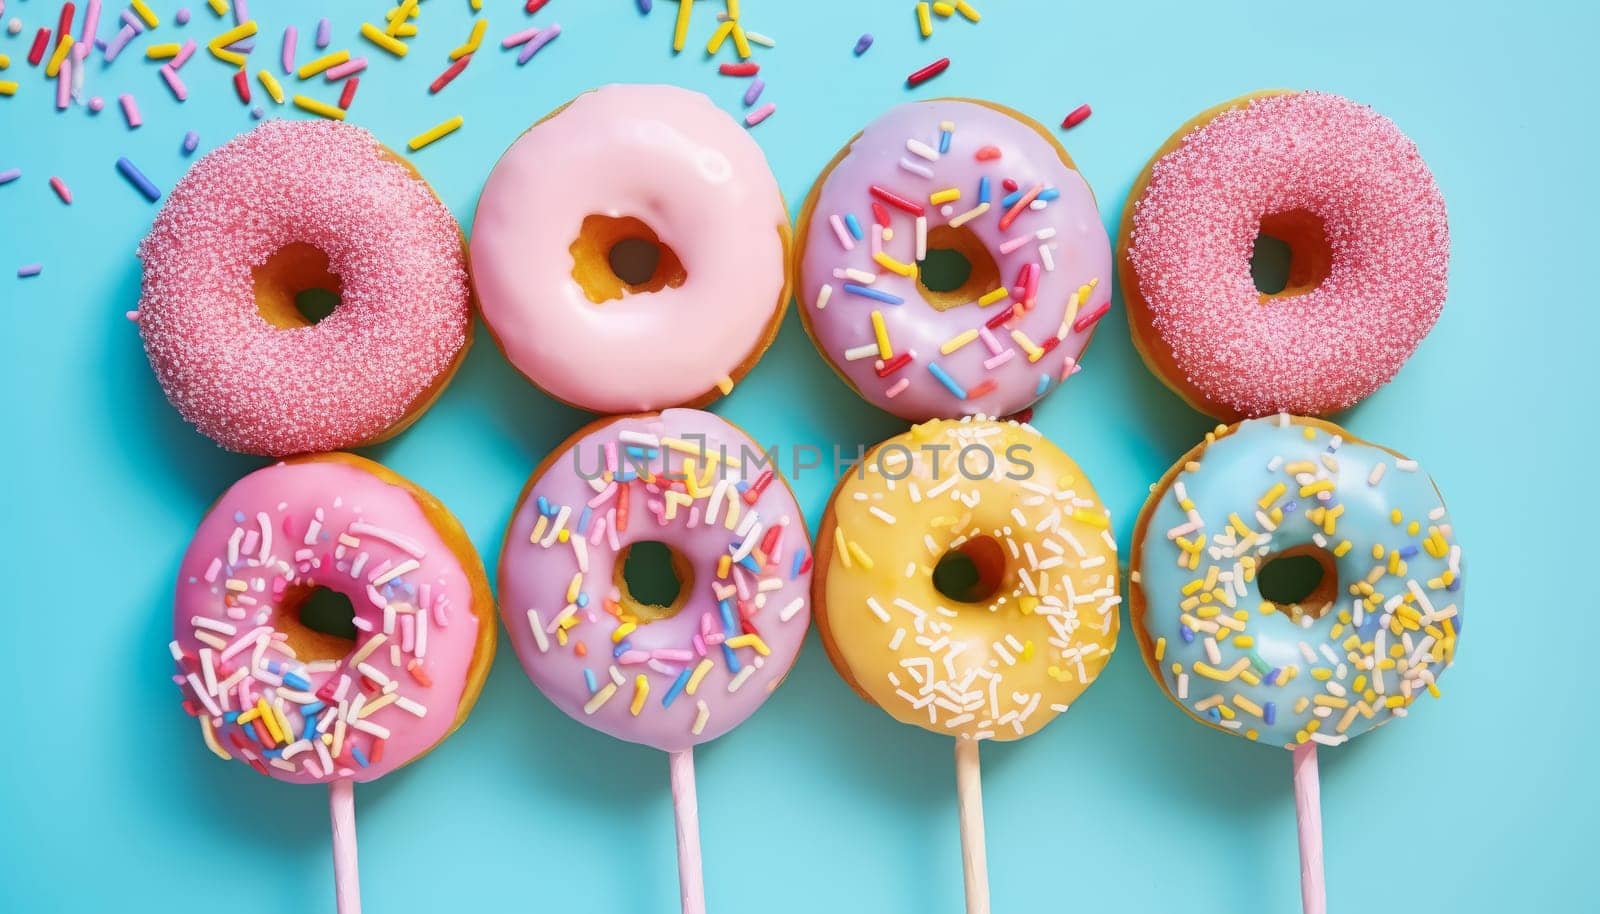 Colorful donuts with sprinkles on blue background by studiodav